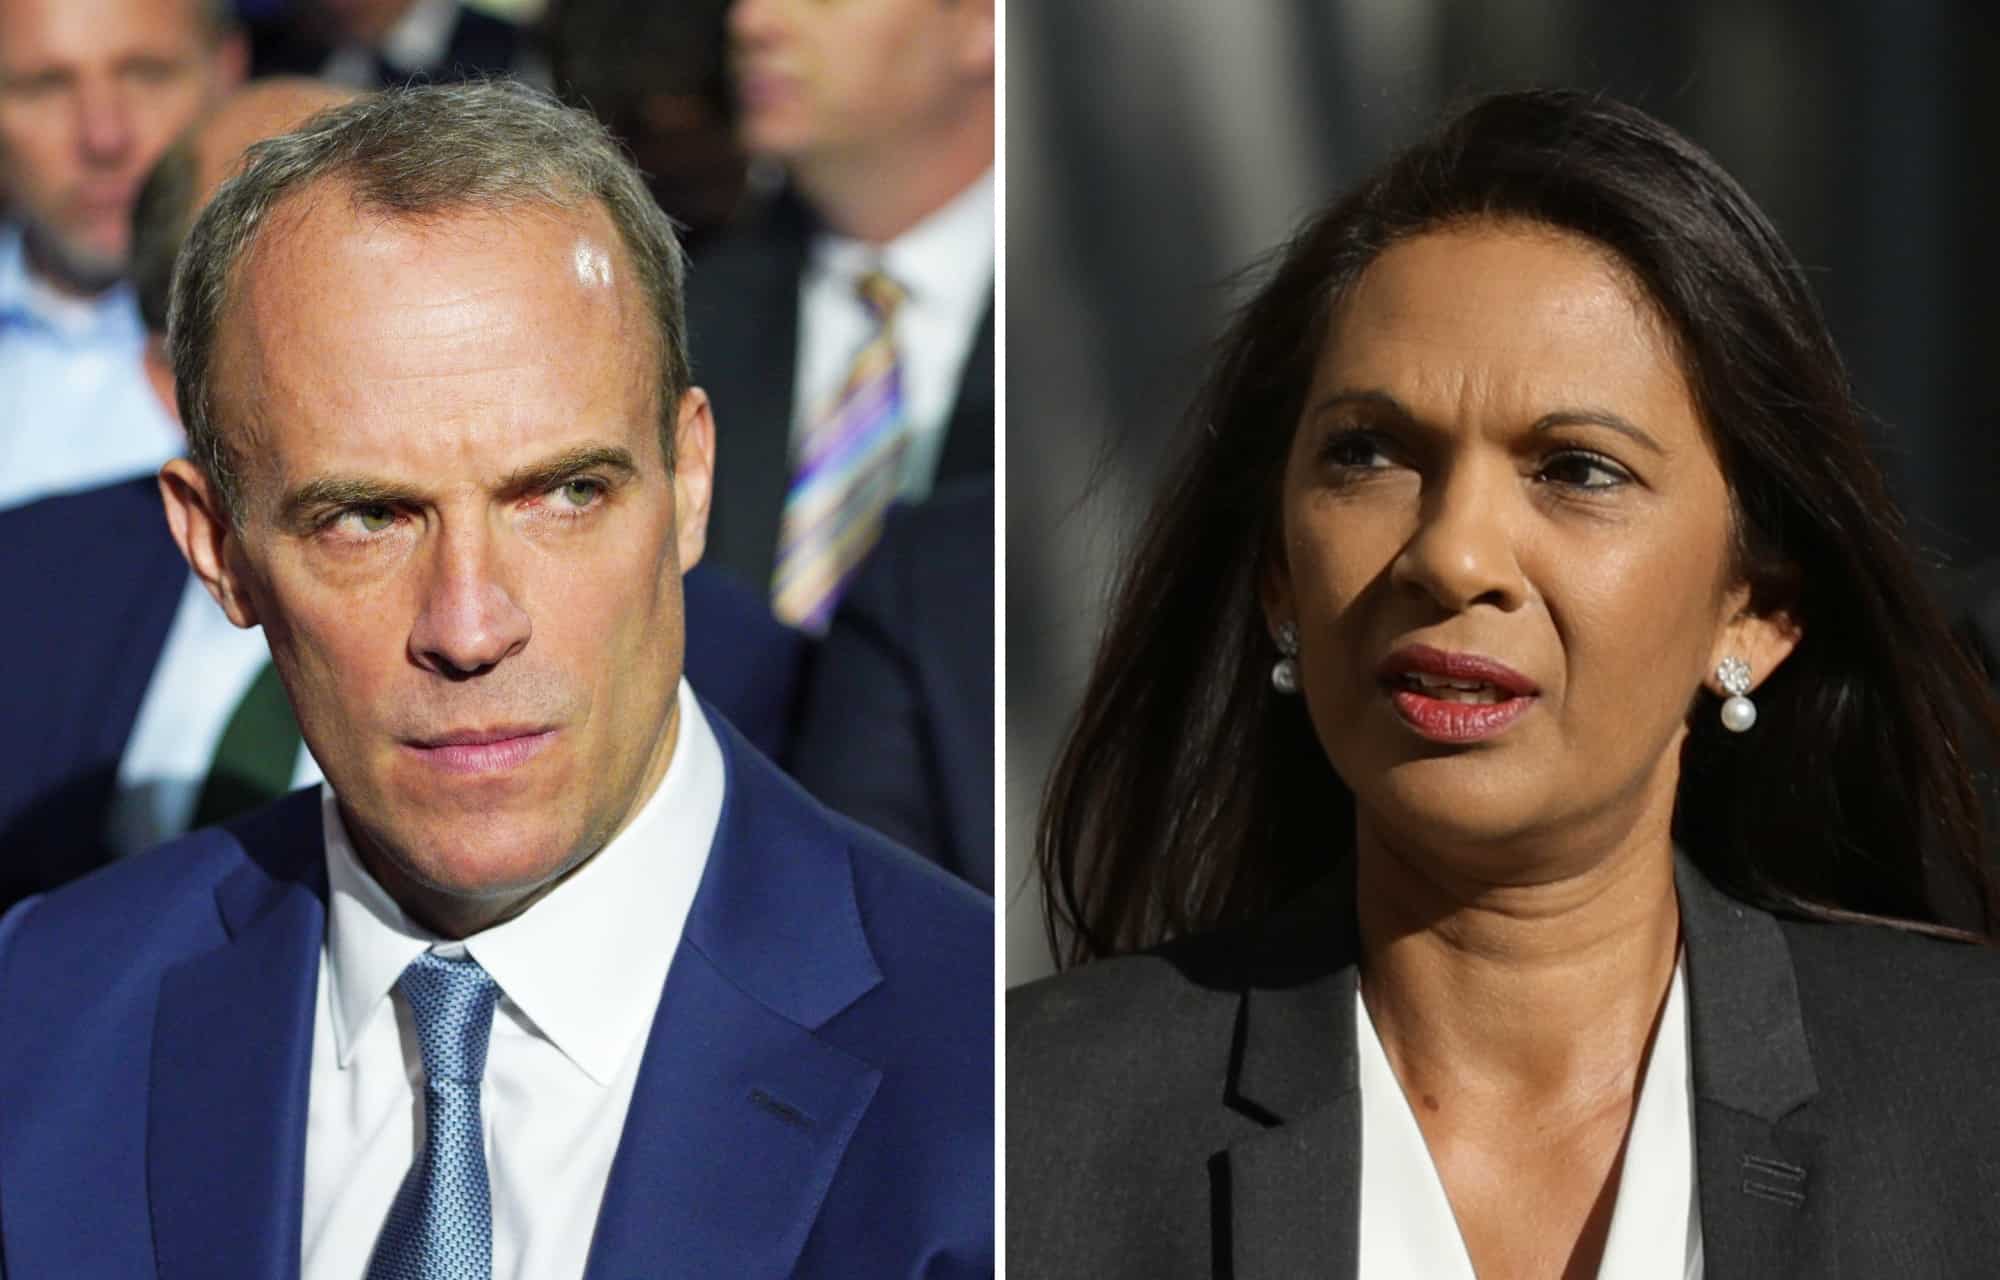 Gina Miller: Dominic Raab called me a ‘silly b*tch’